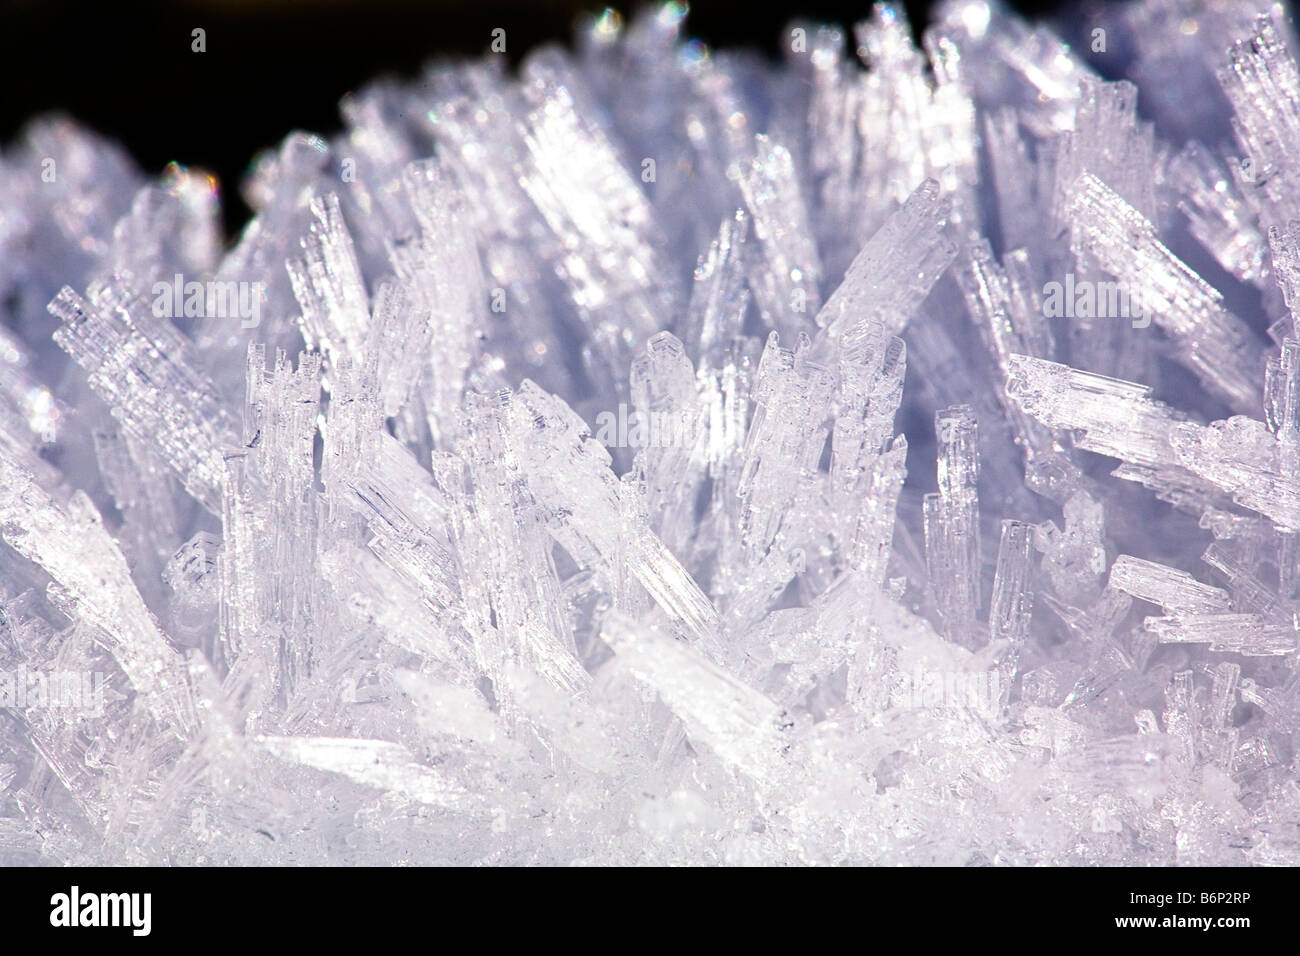 Close up image of ice crystals forming in bunches and groups Stock Photo